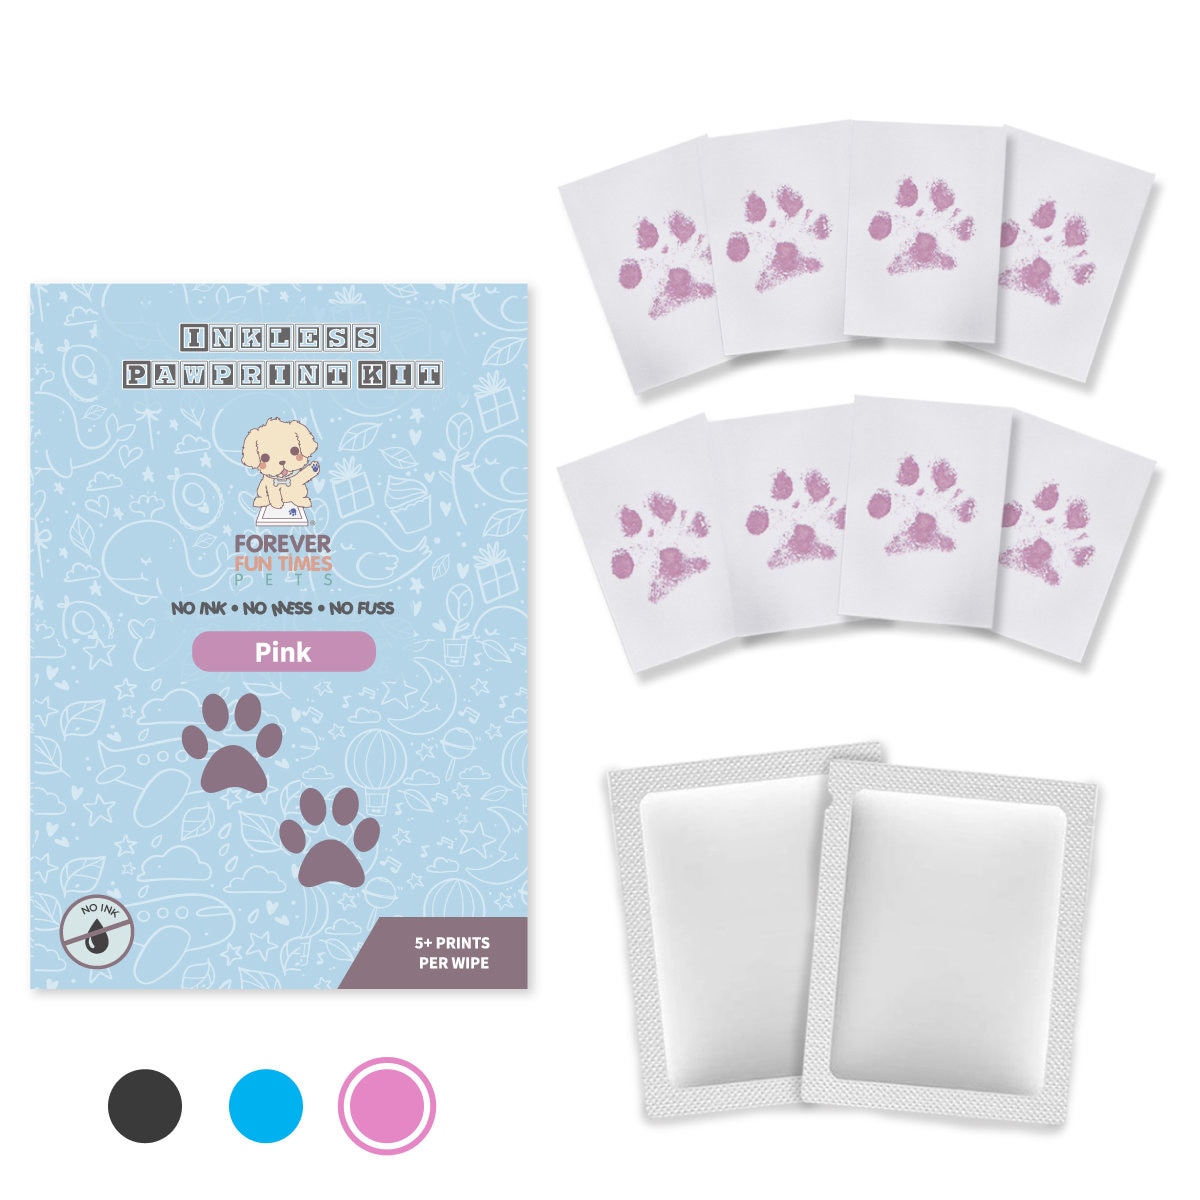 Black Baby Inkless Print Kit With 2 Special Wipes by Forever Fun Times Baby  Hand and Footprint Kit With 8 20.6x14cm Sheets of Paper 